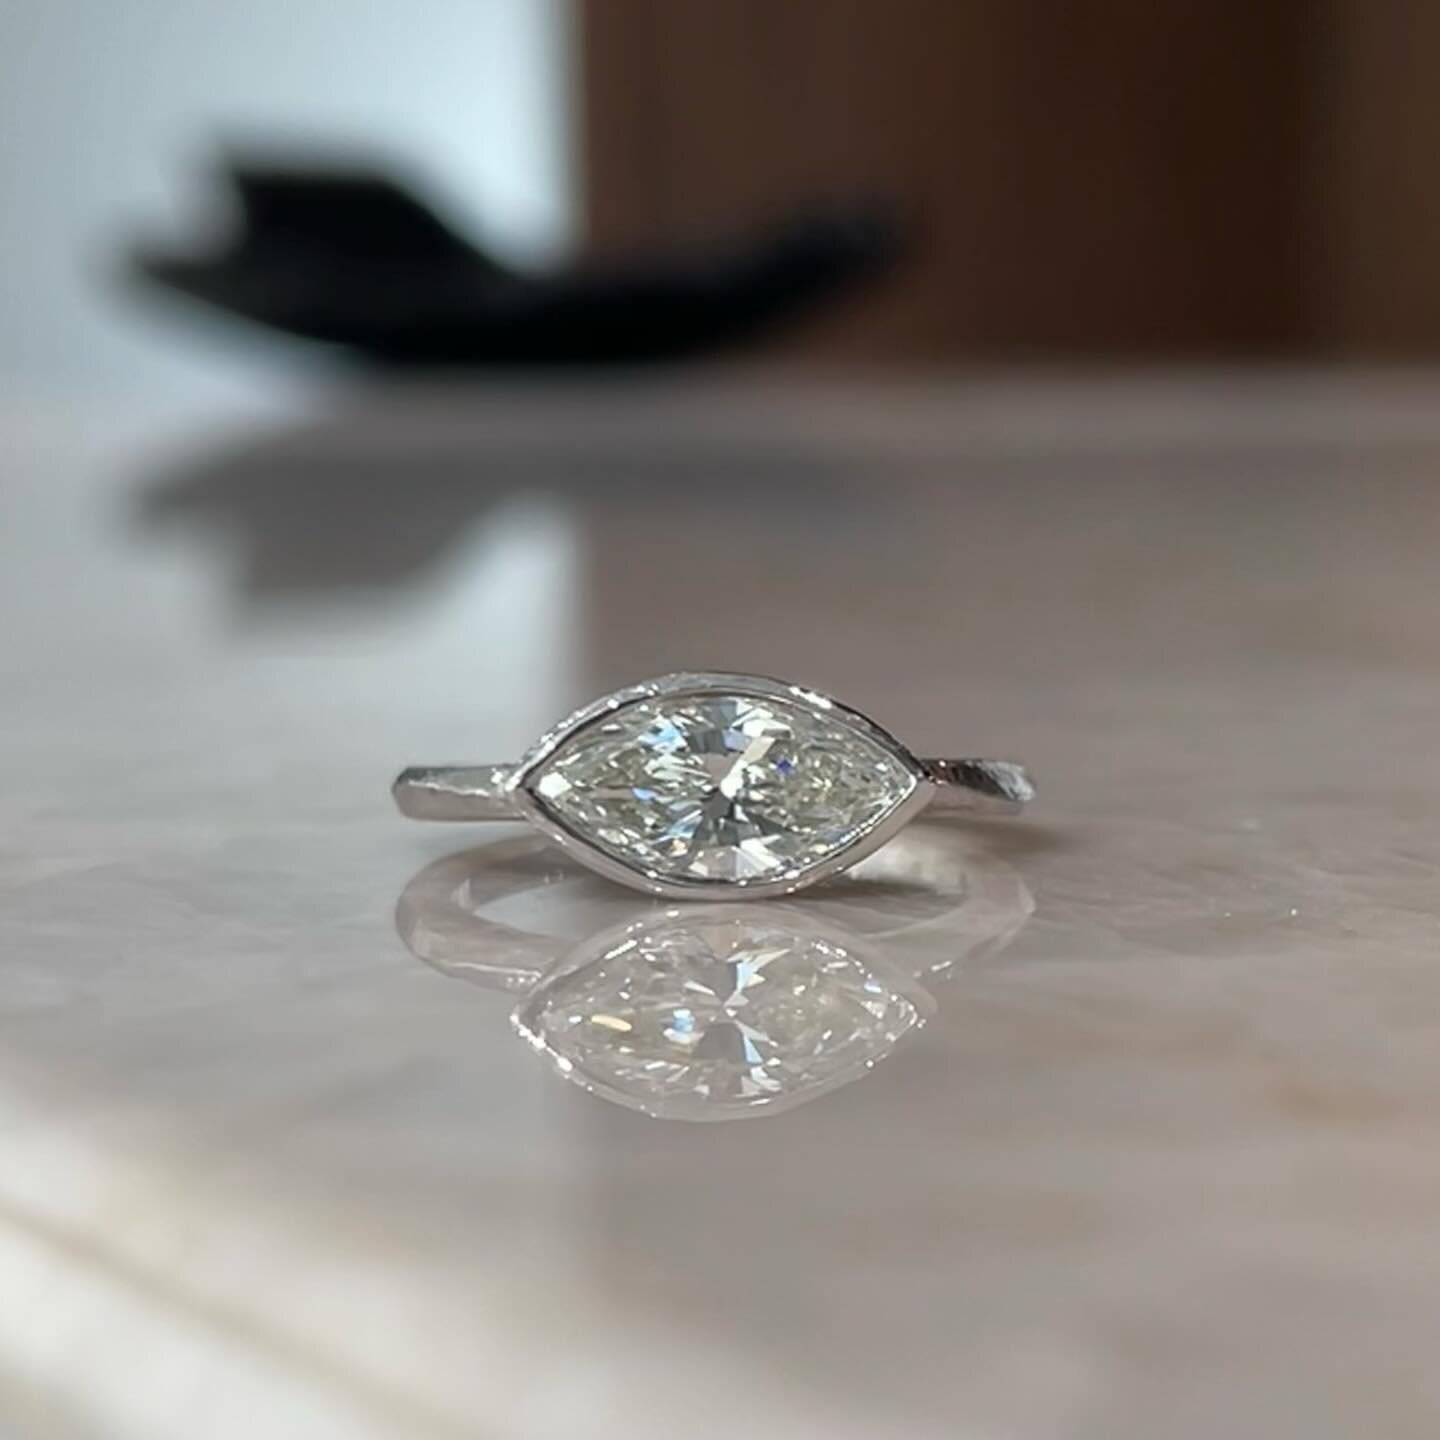 Loving this custom ring! A modern twist for a solitaire diamond ring.

Wave Bezel Solitaire Ring in Platinum with a Treasured Finish, and set with a 1.08ct Marquise Shaped Diamond.